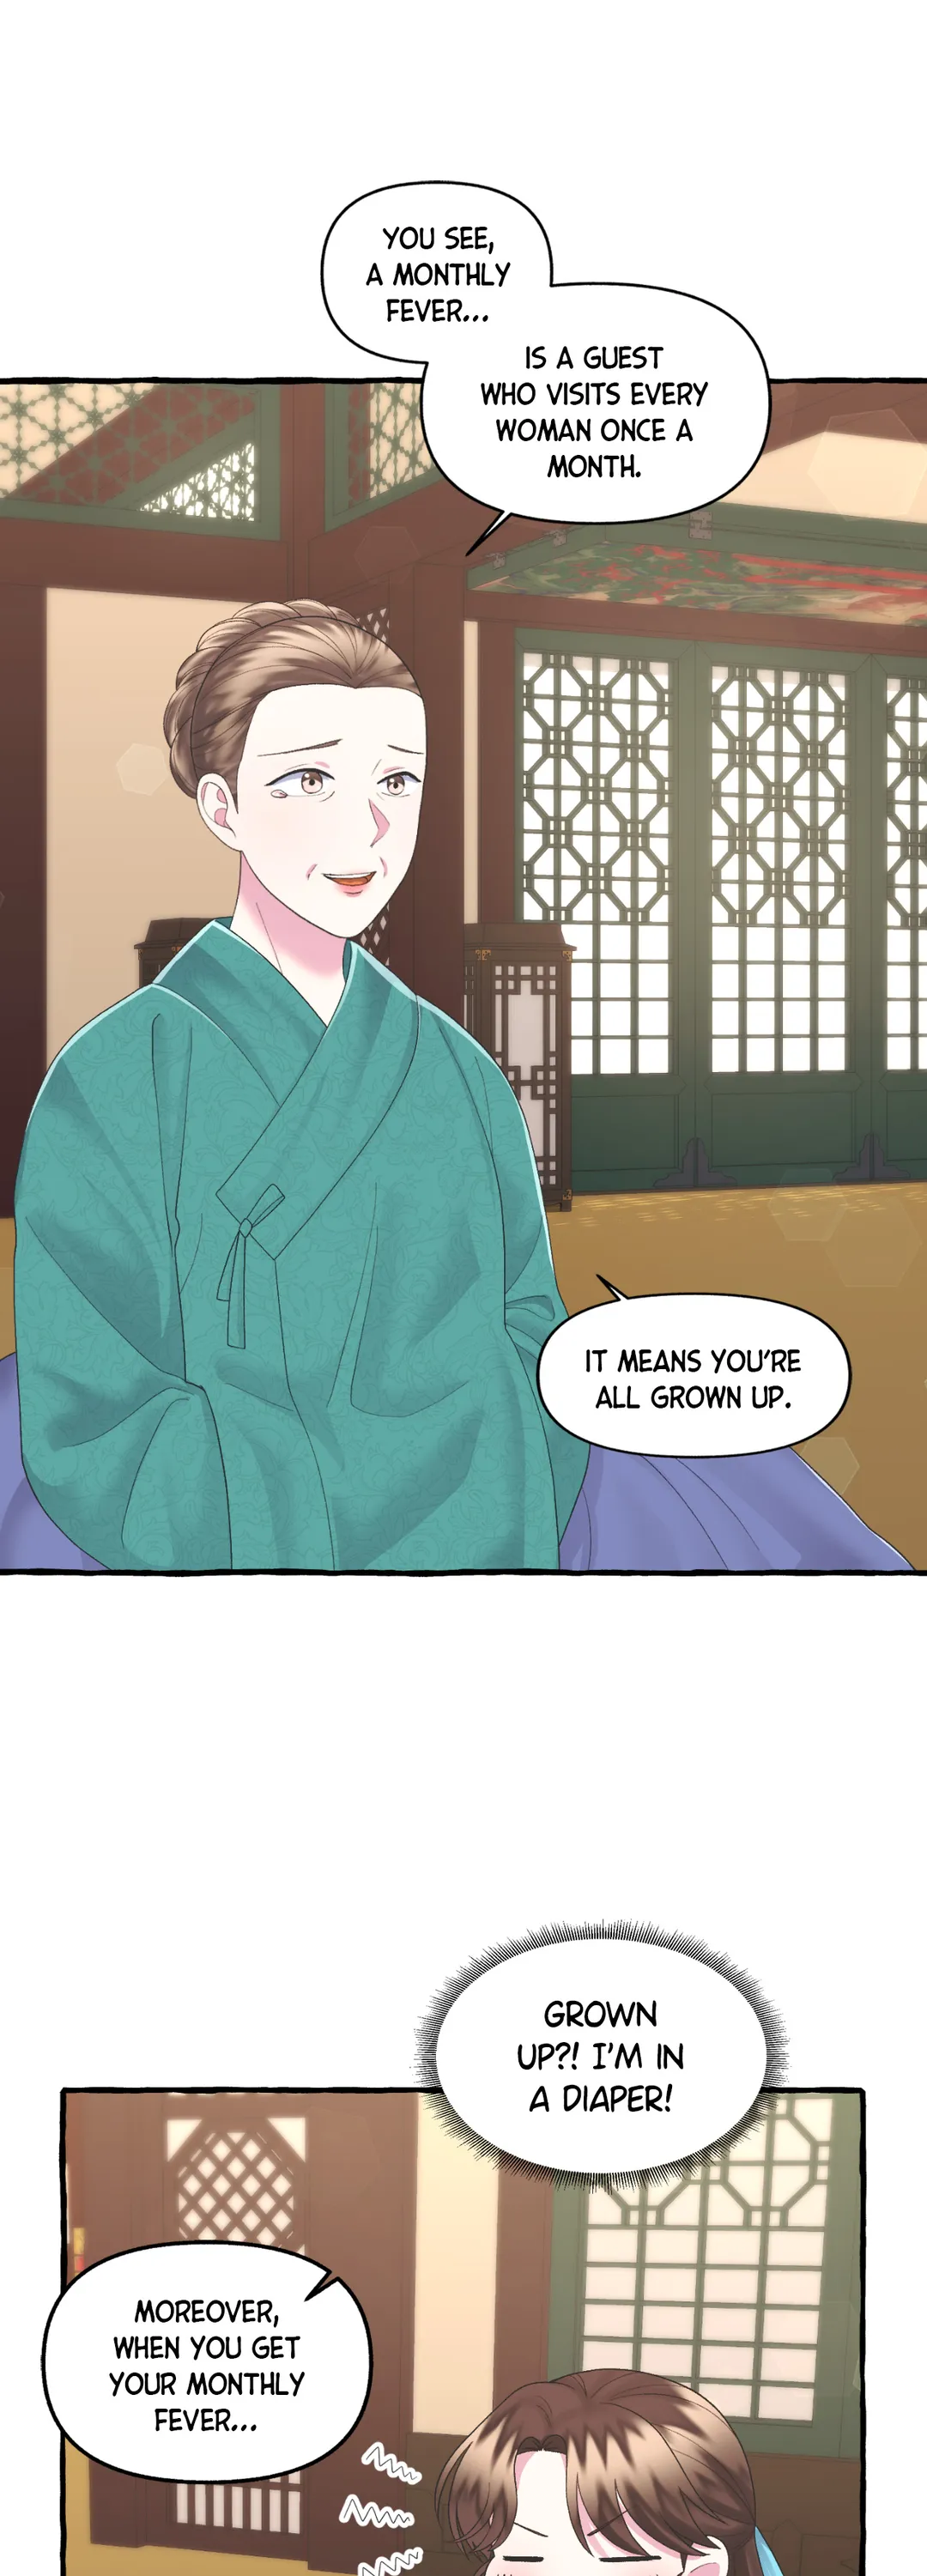 Cheer Up, Your Highness! chapter 24